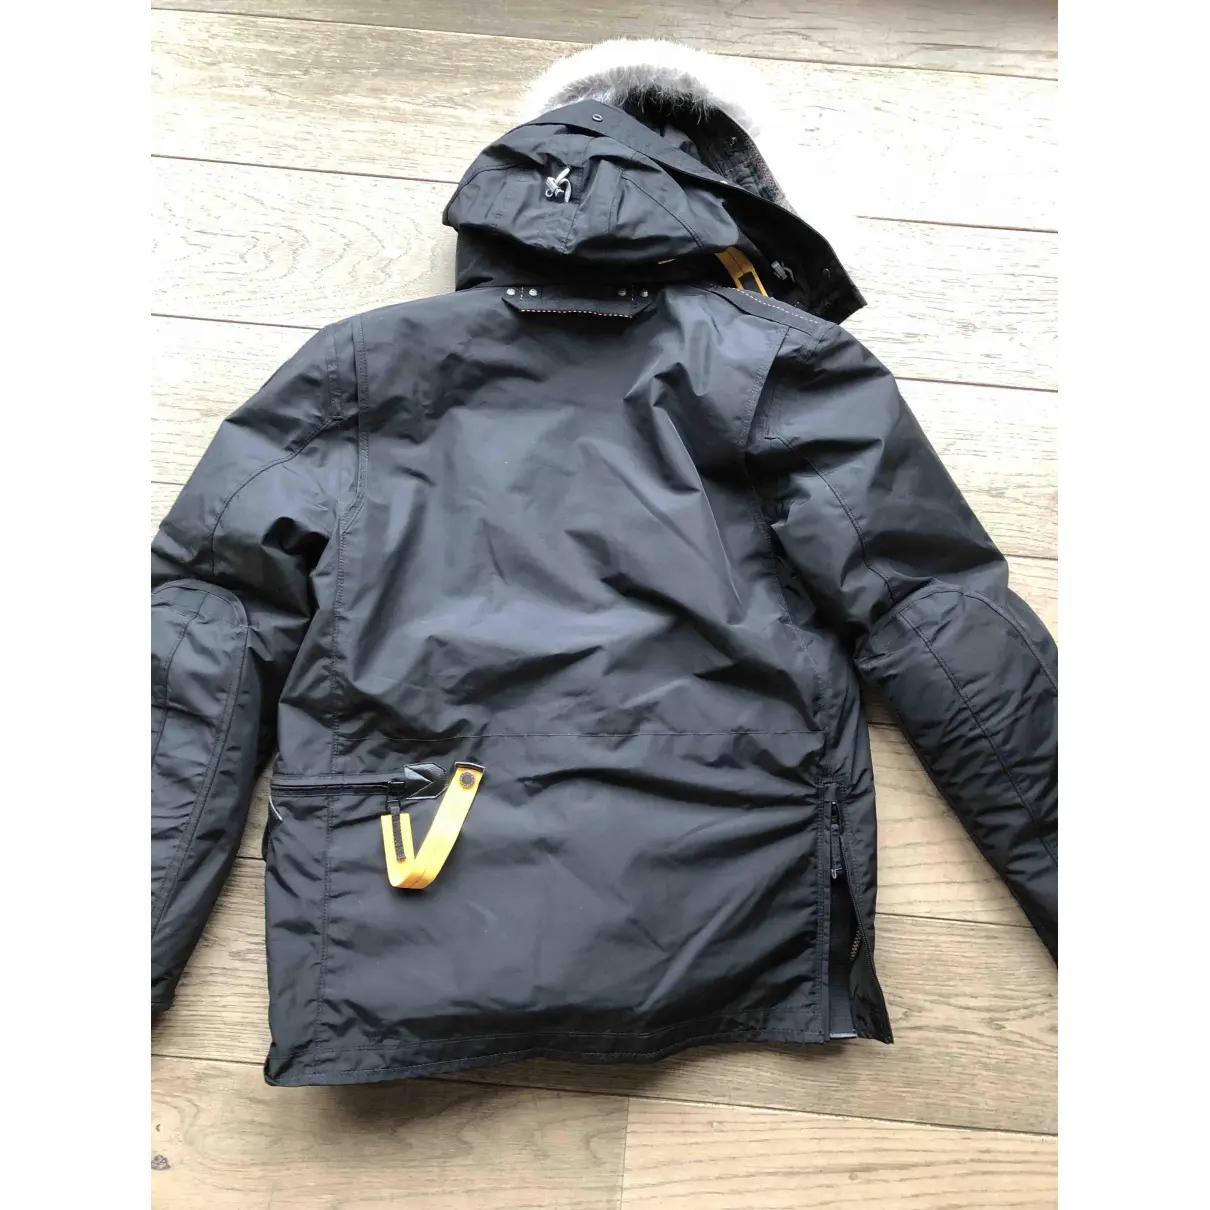 Buy Parajumpers Black Synthetic Coat online